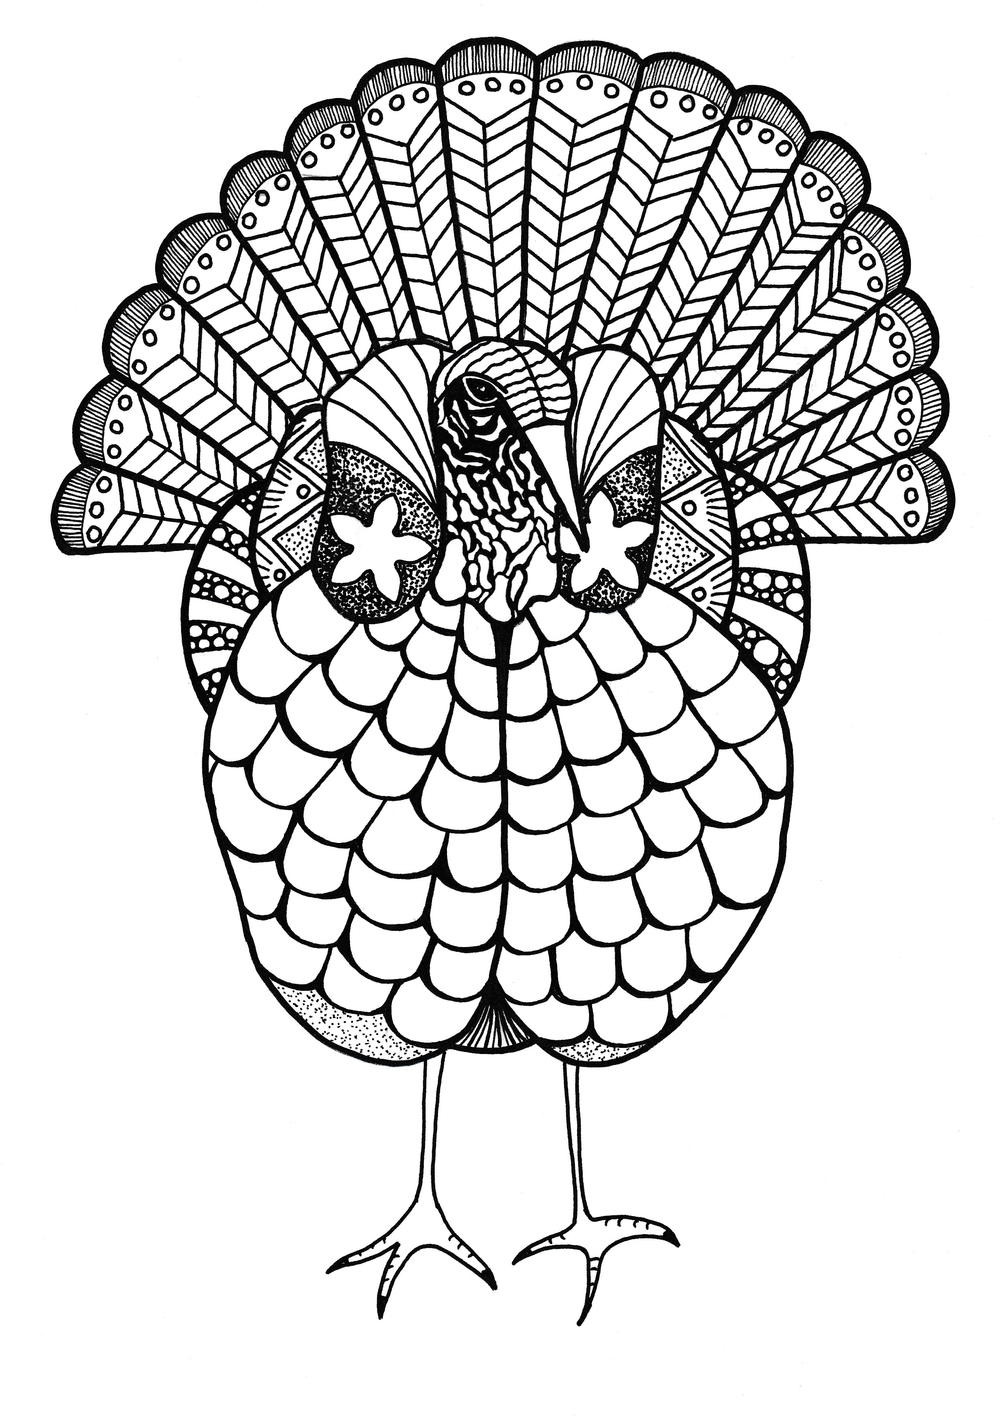 Coloring Sheet For Adults
 Colorful Turkey Adult Coloring Page